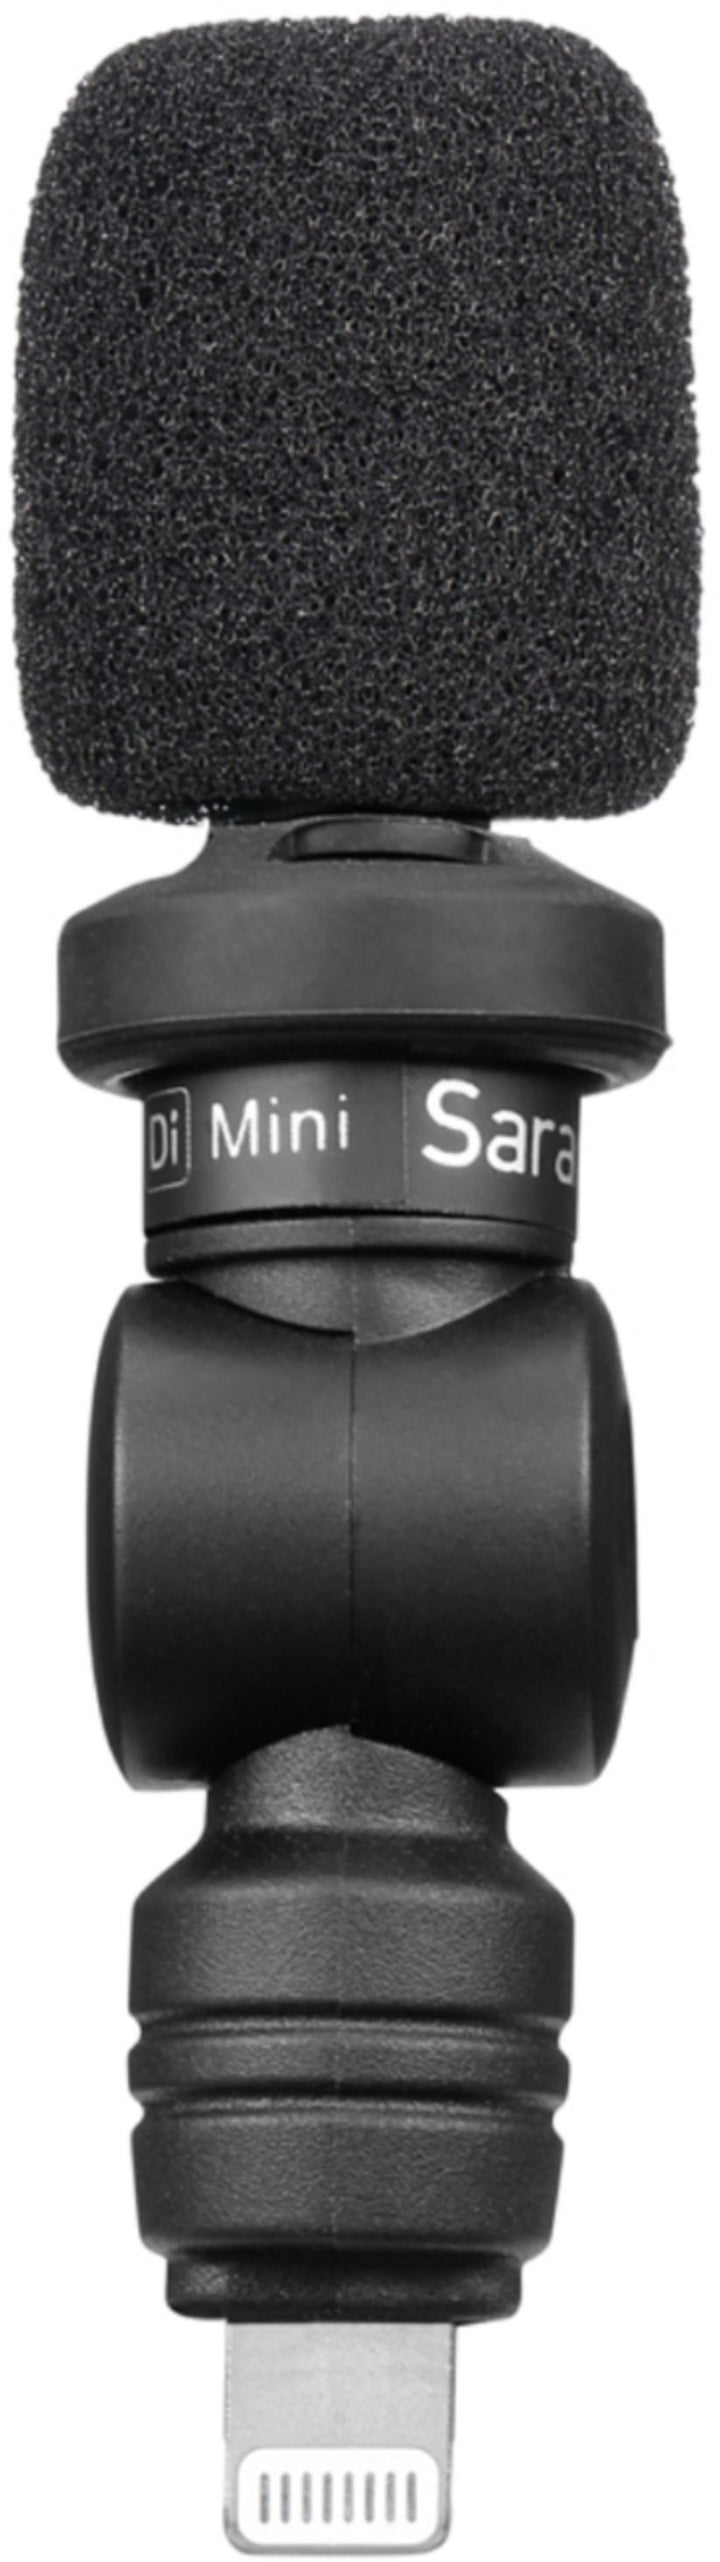 Saramonic - SmartMic DI Mini Ultra-Compact Condenser Microphone with Lightning for Apple iPhones & iPads_6